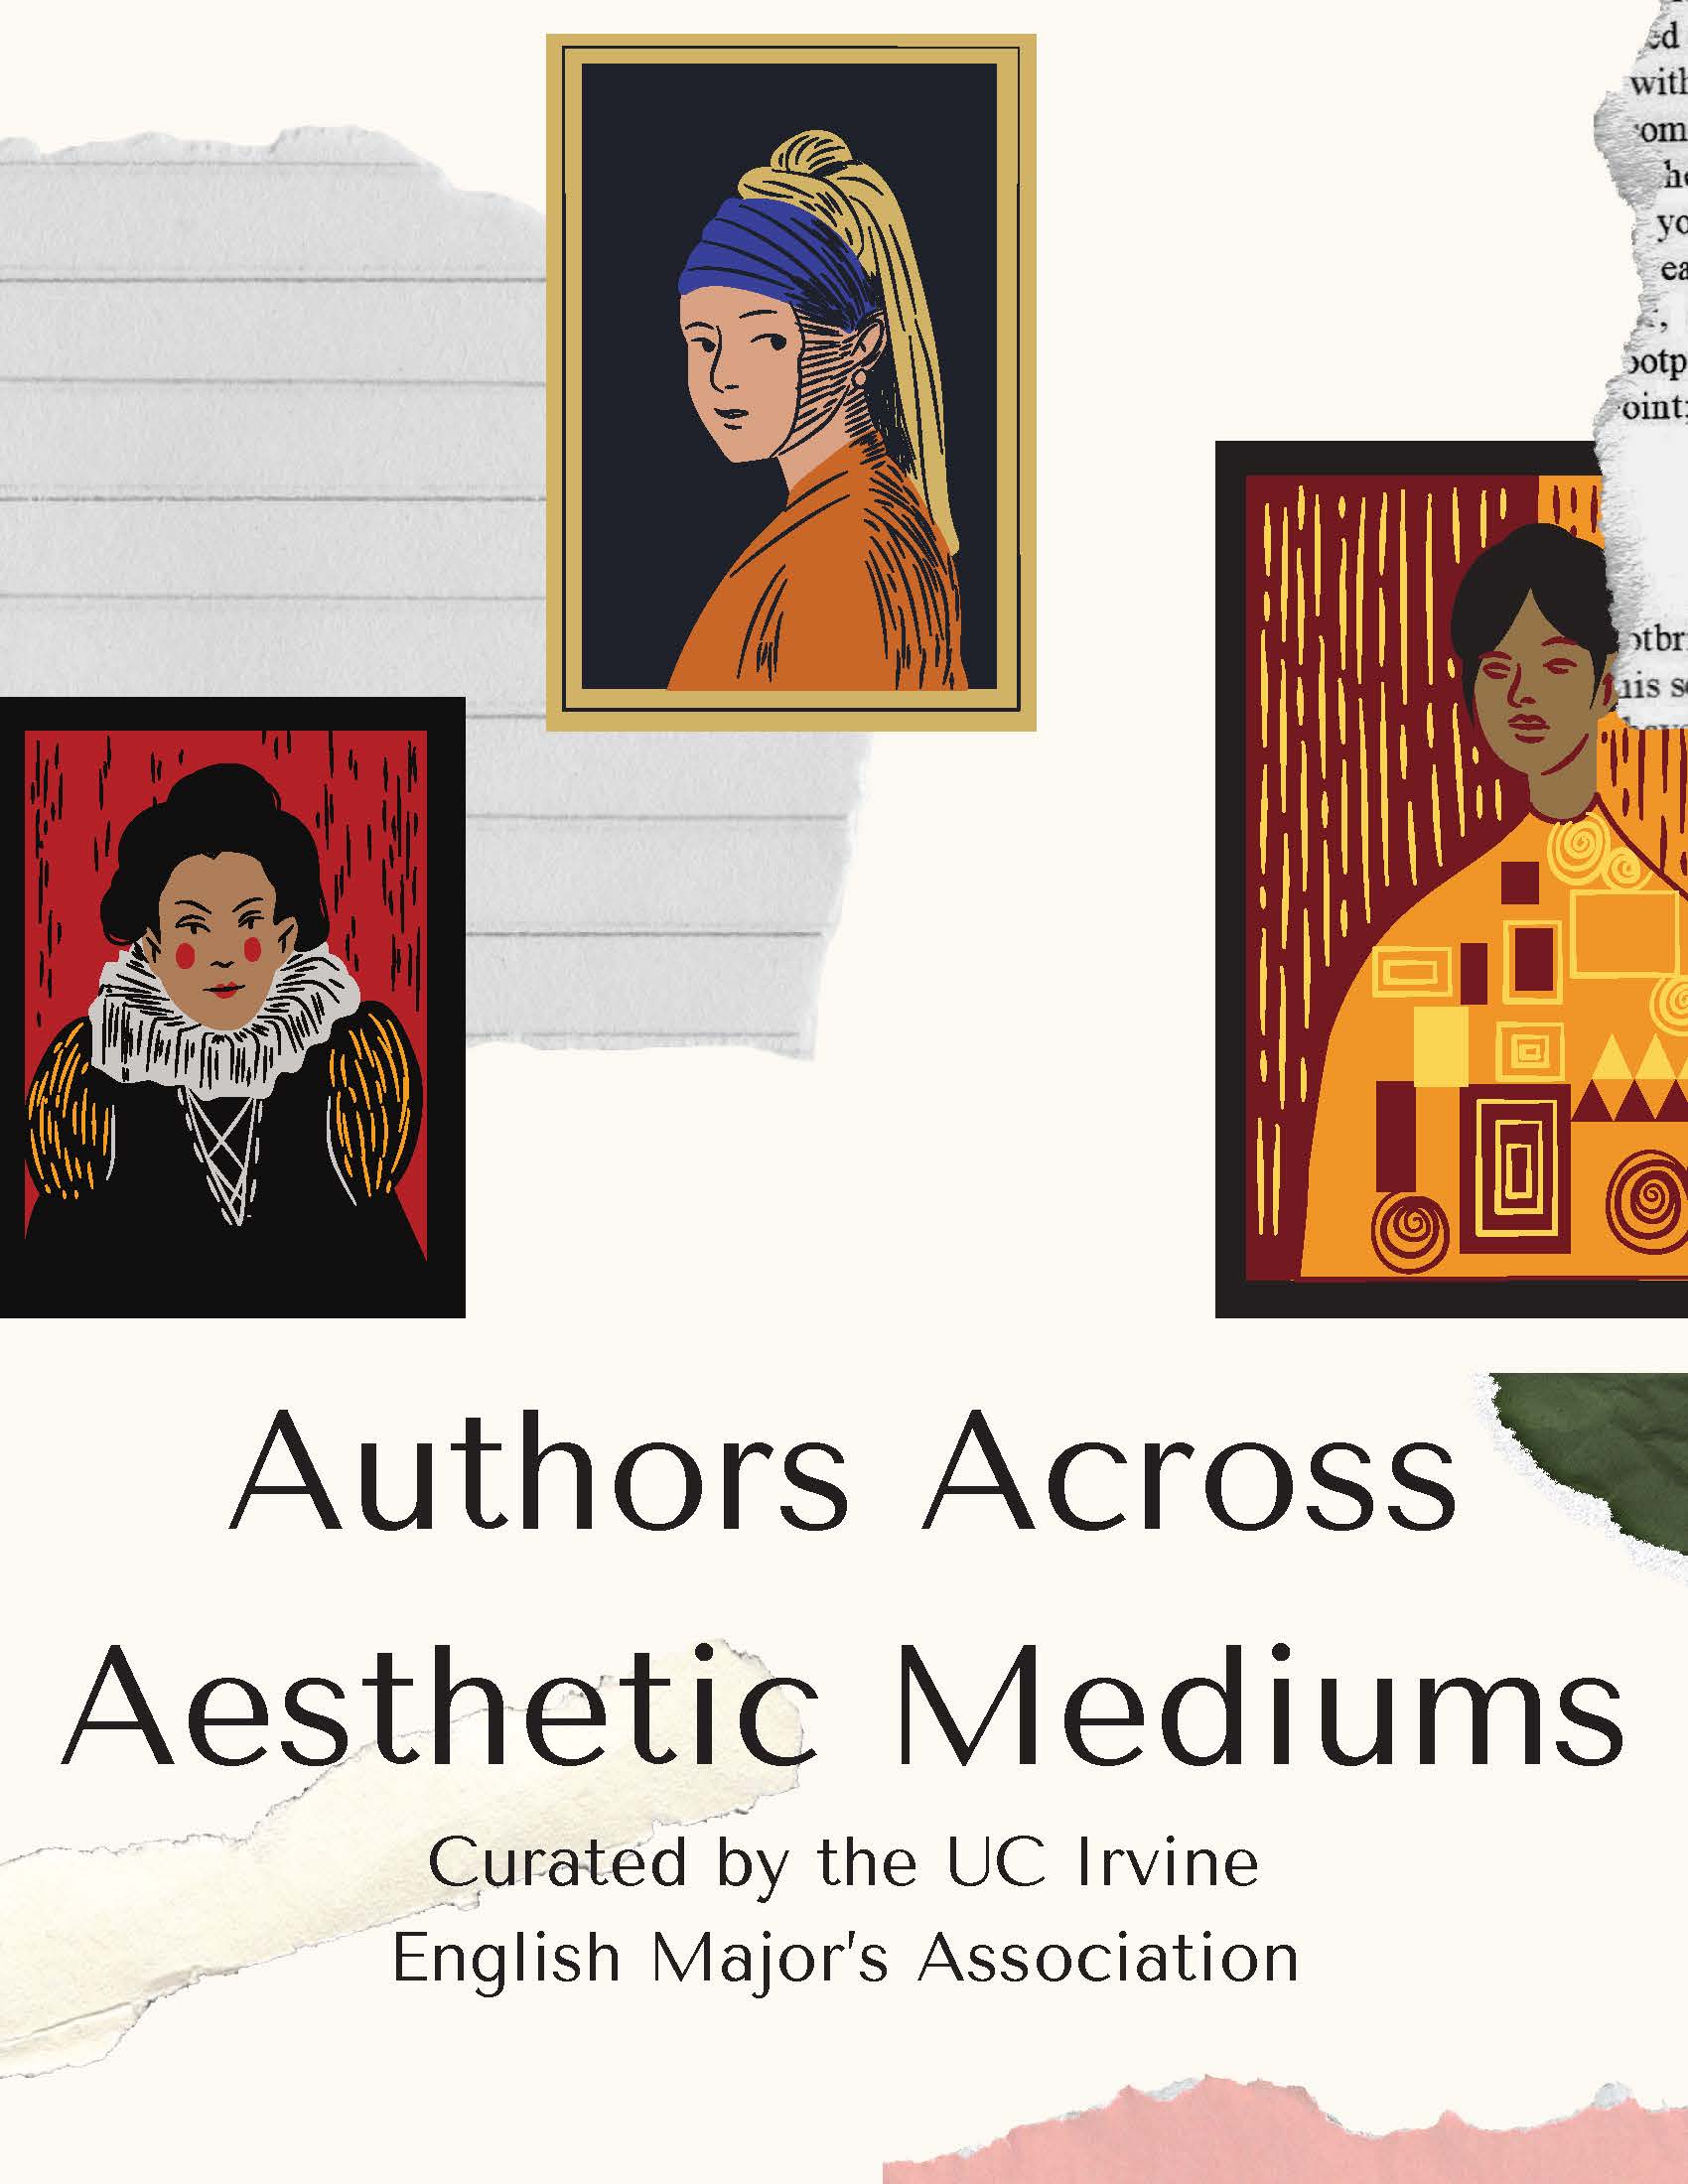 Authors Across Aesthetic Mediums curated by EMA